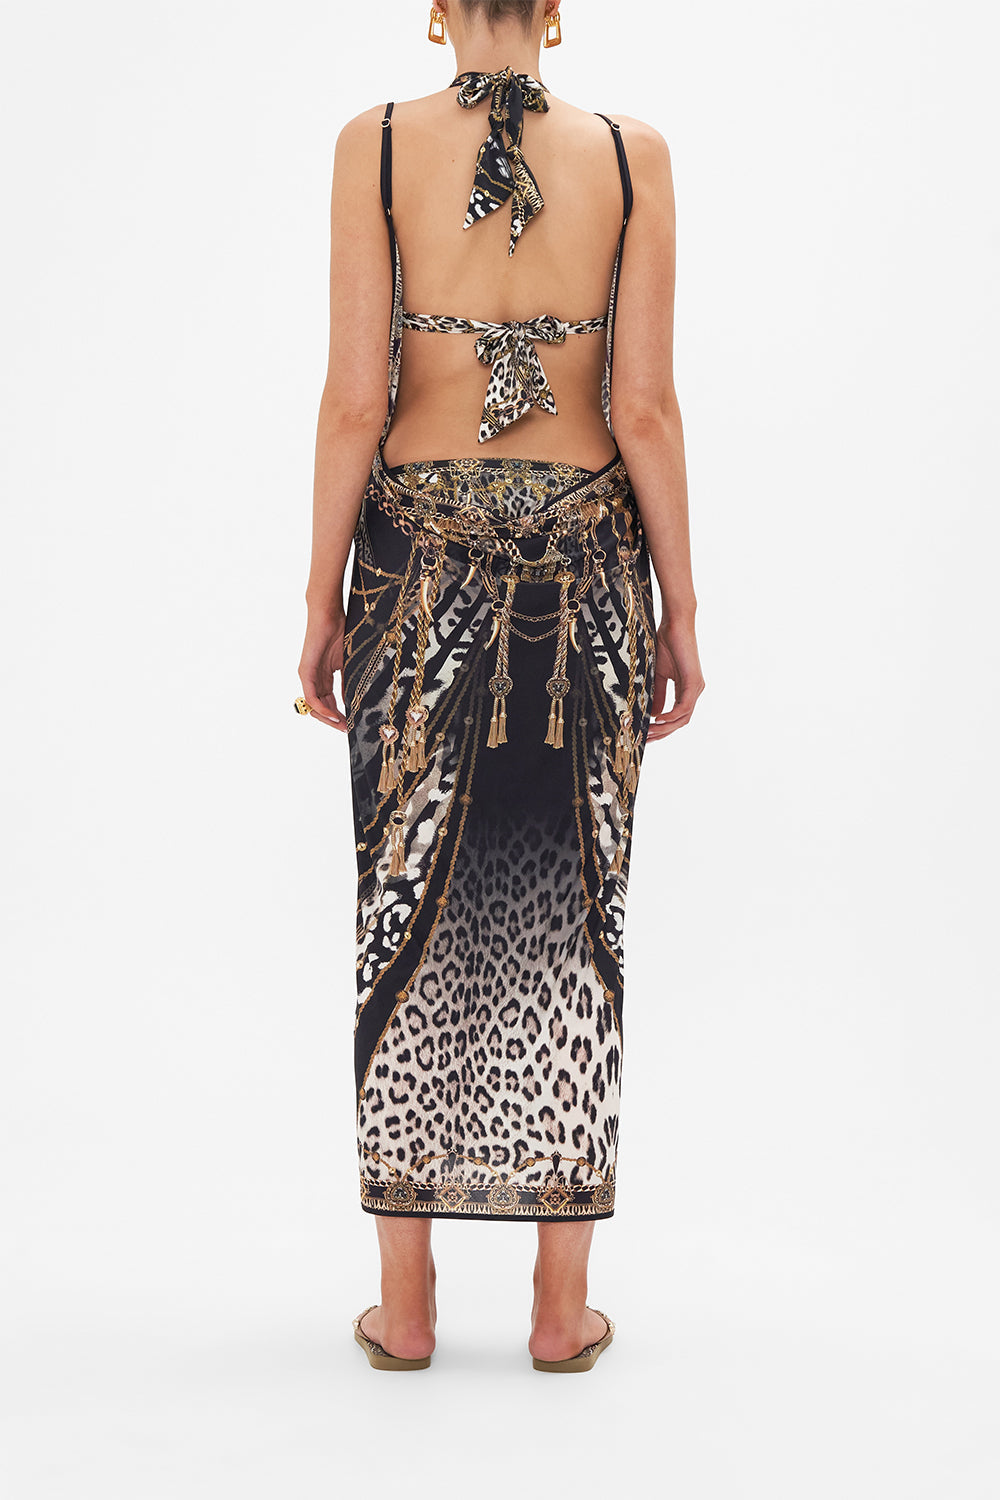 SARONG WITH STRAPS AND TRIM DETAIL UNTAMED ROYALTY